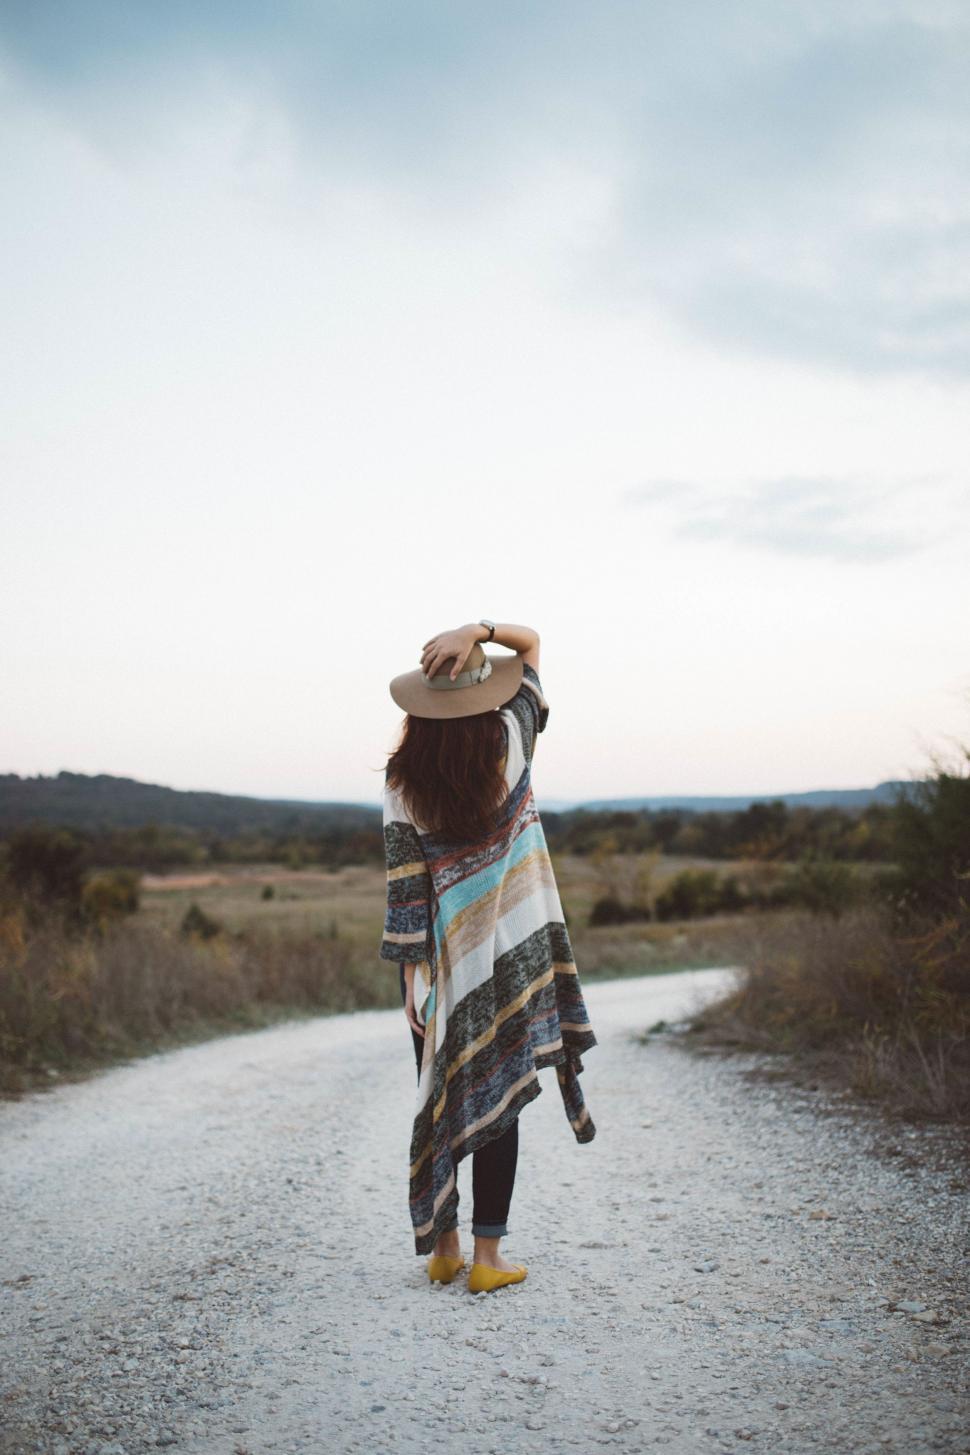 Free Image of Woman Walking Down Dirt Road With Hat 